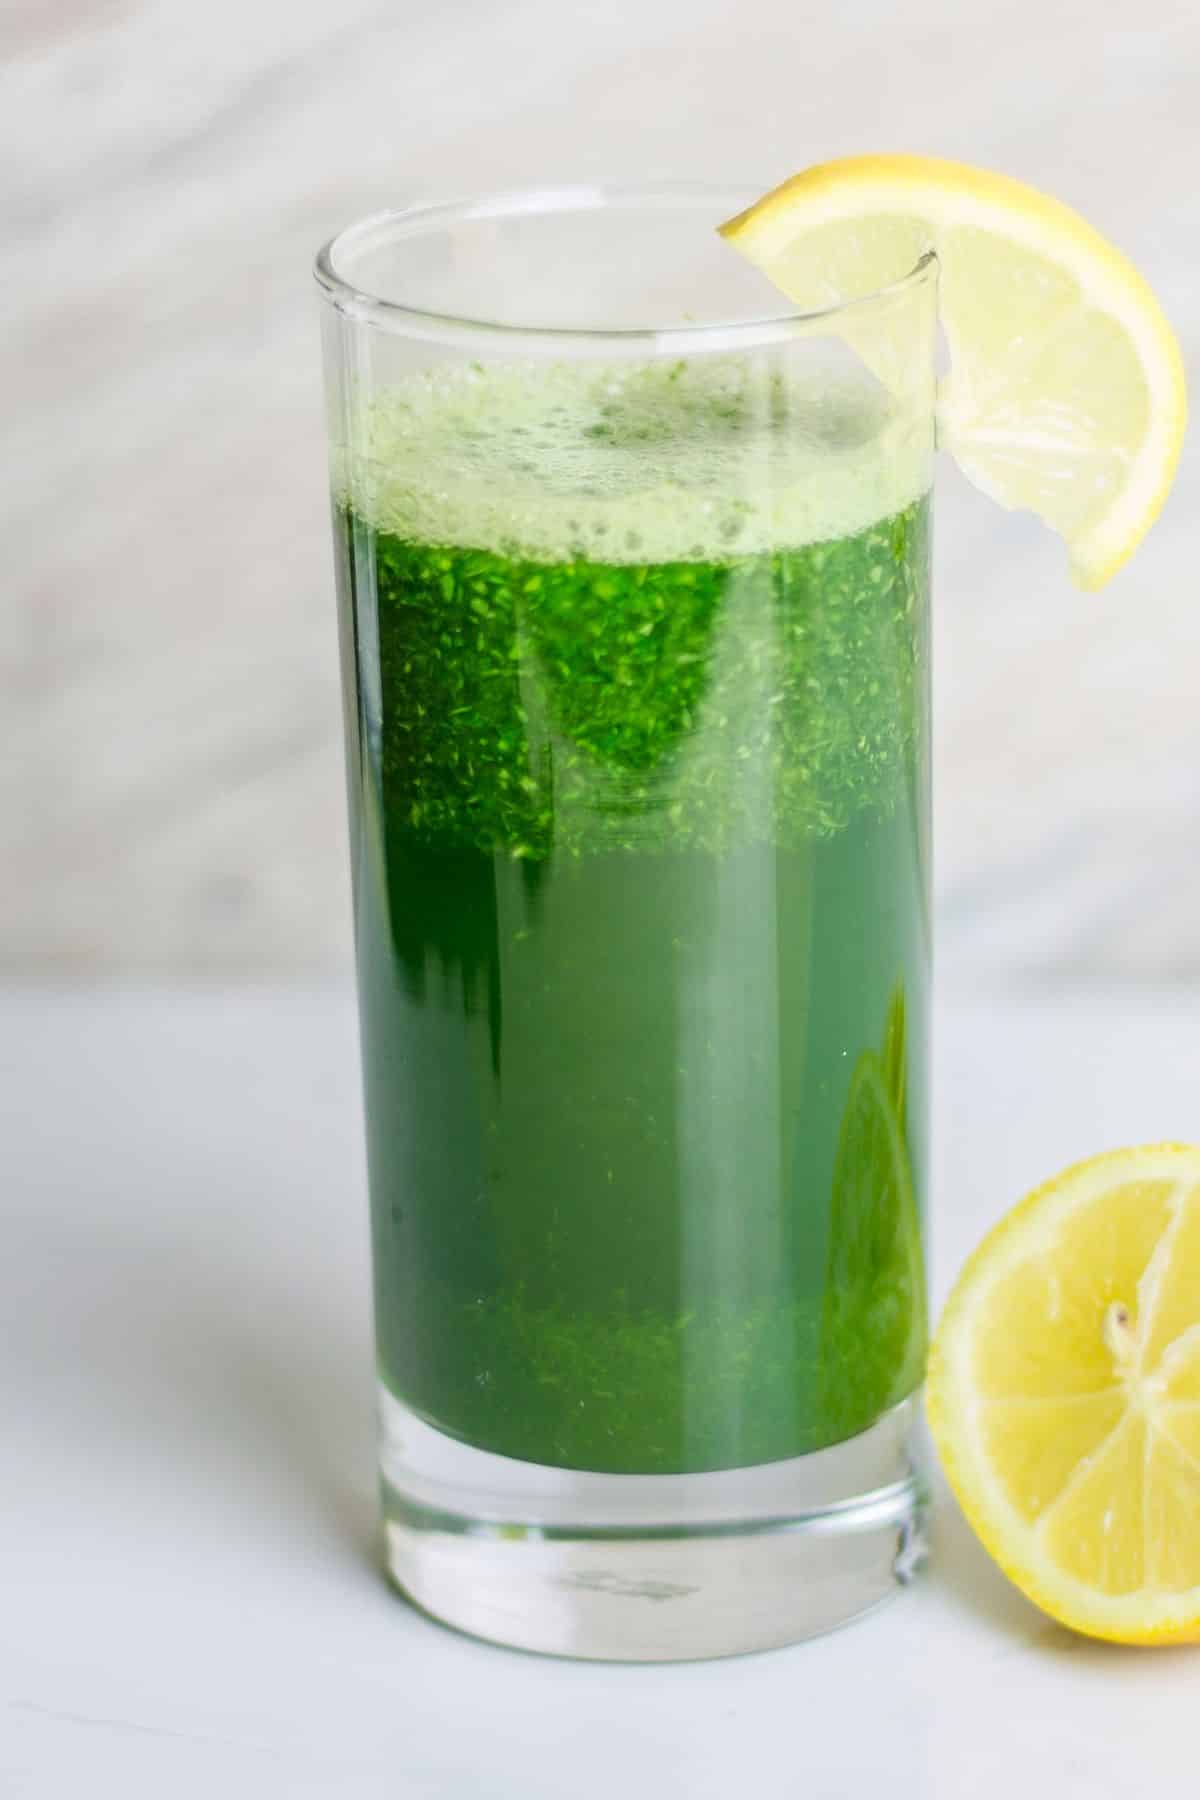 A skinny glass of spinach juice with a lemon wedge on the rim.